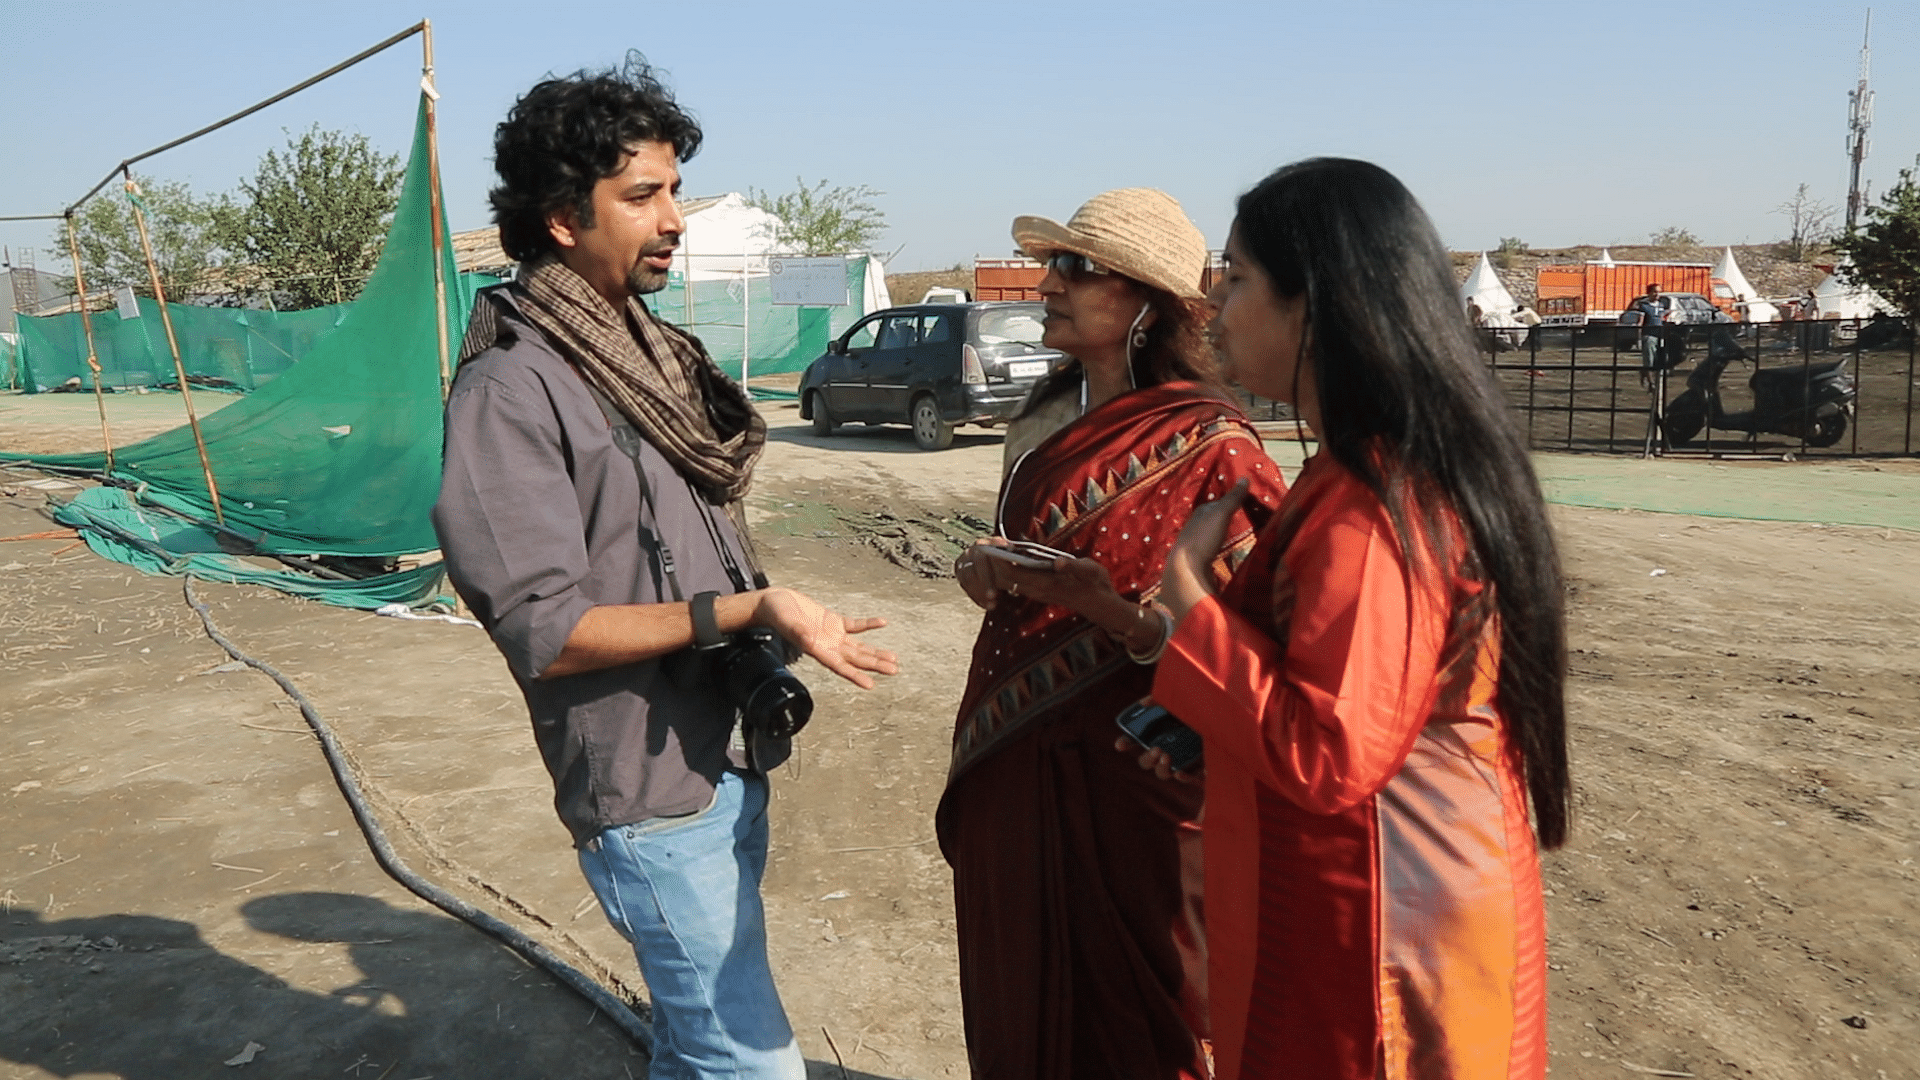 Art of Living volunteers arguing with activist Vimlendu Jha (left) at the site of the World Culture Festival on Monday. (Photo: <b>The Quint</b>)